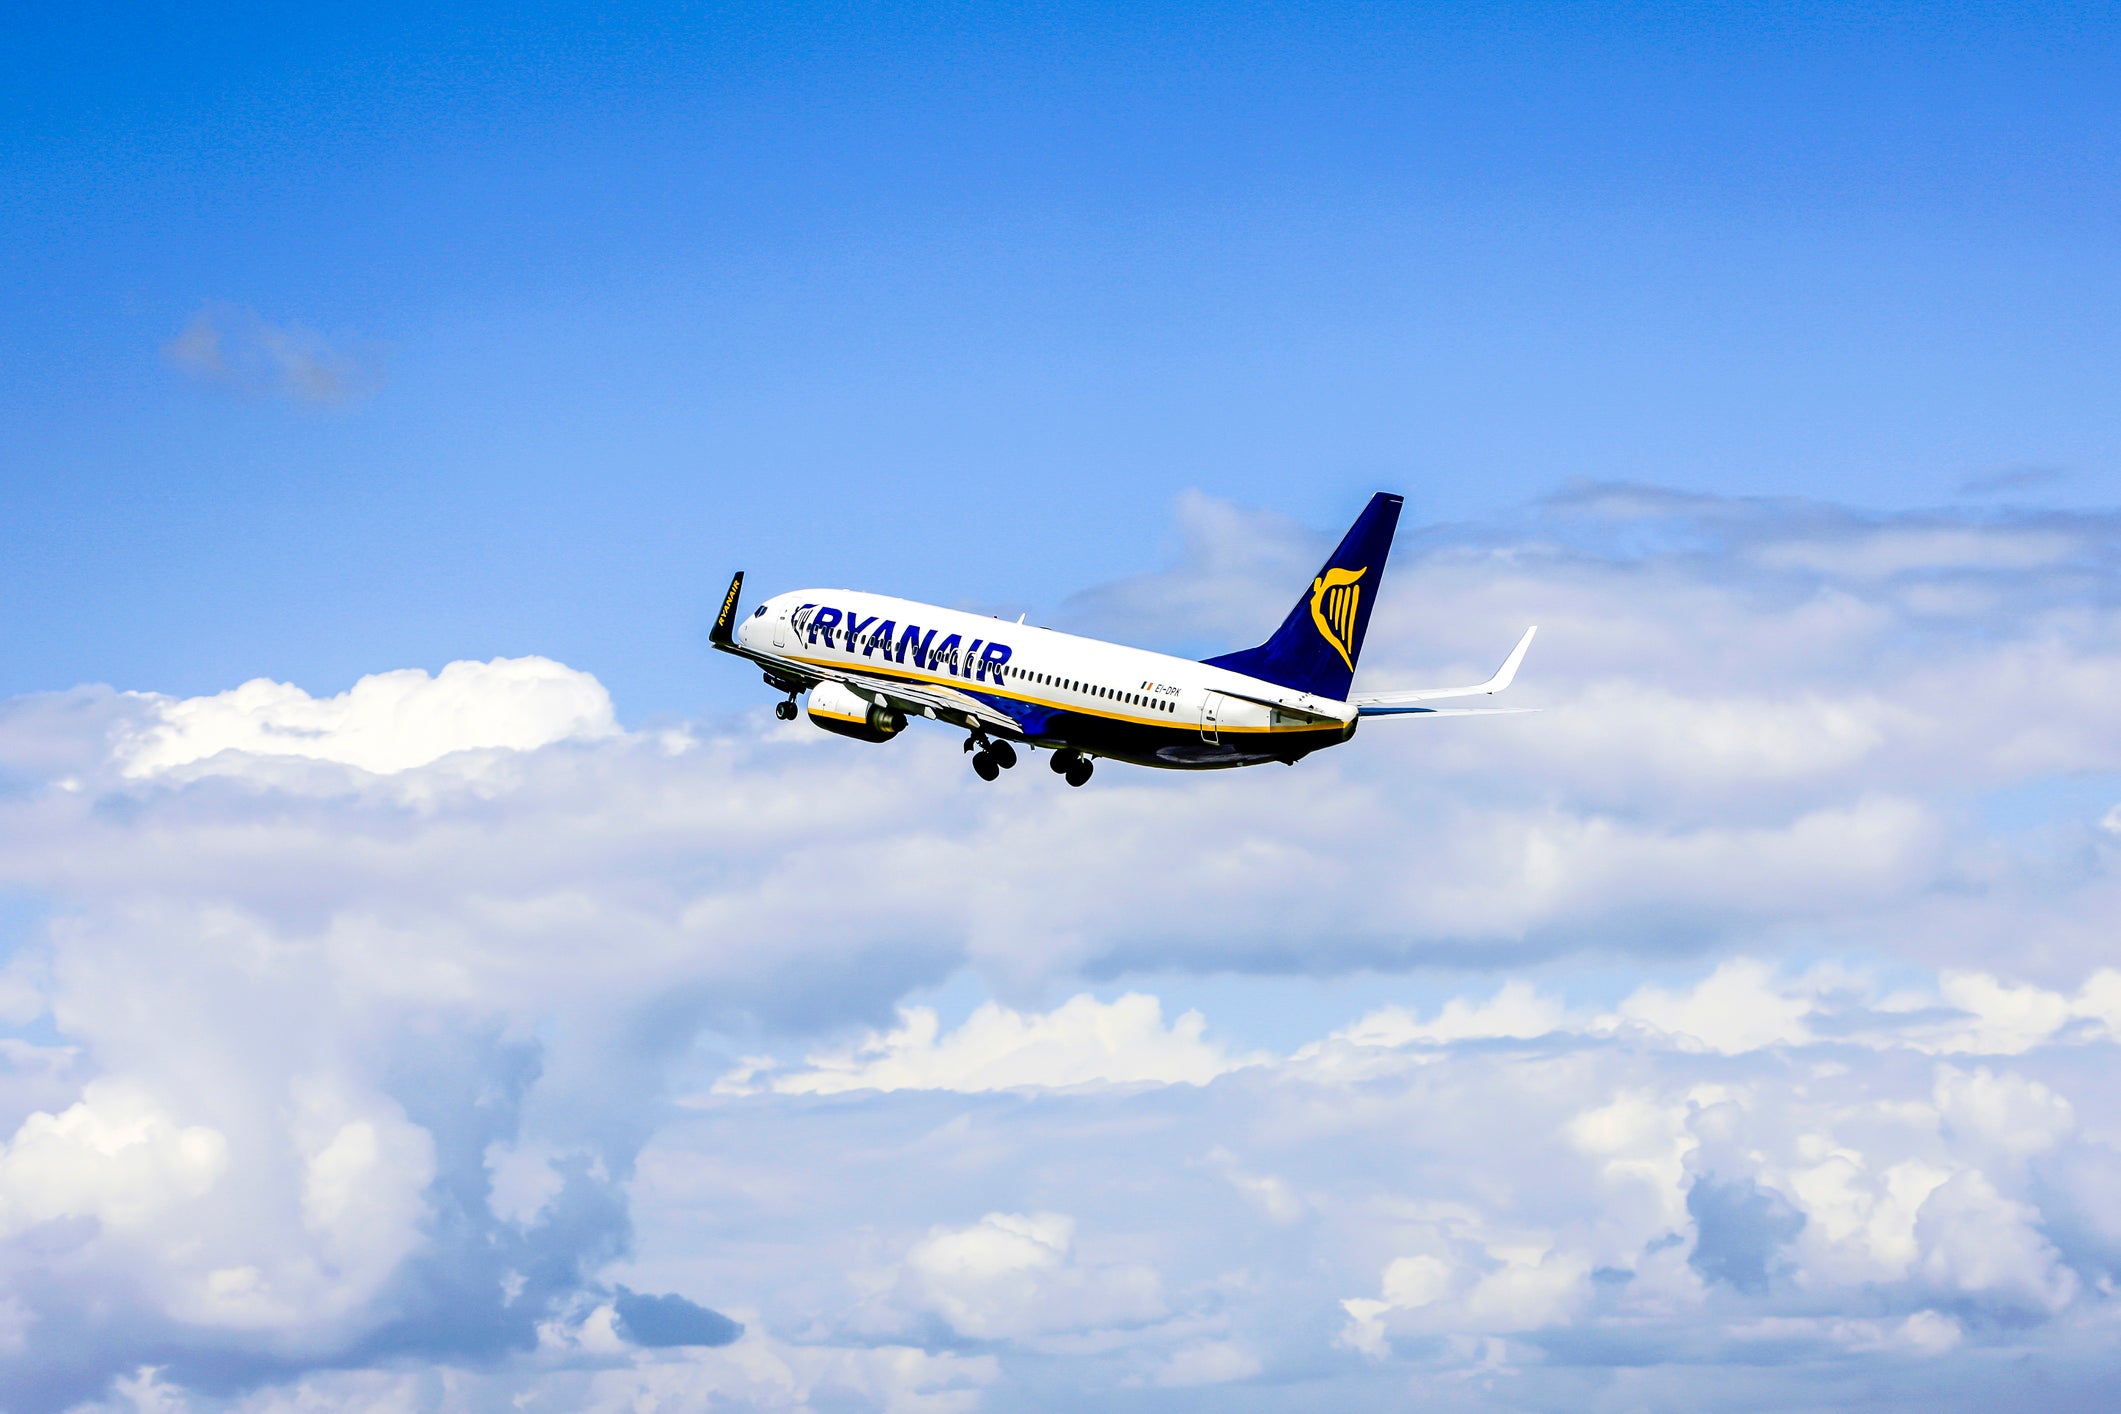 Ryanair will add up to 1,000 new pilots a year for the next five years